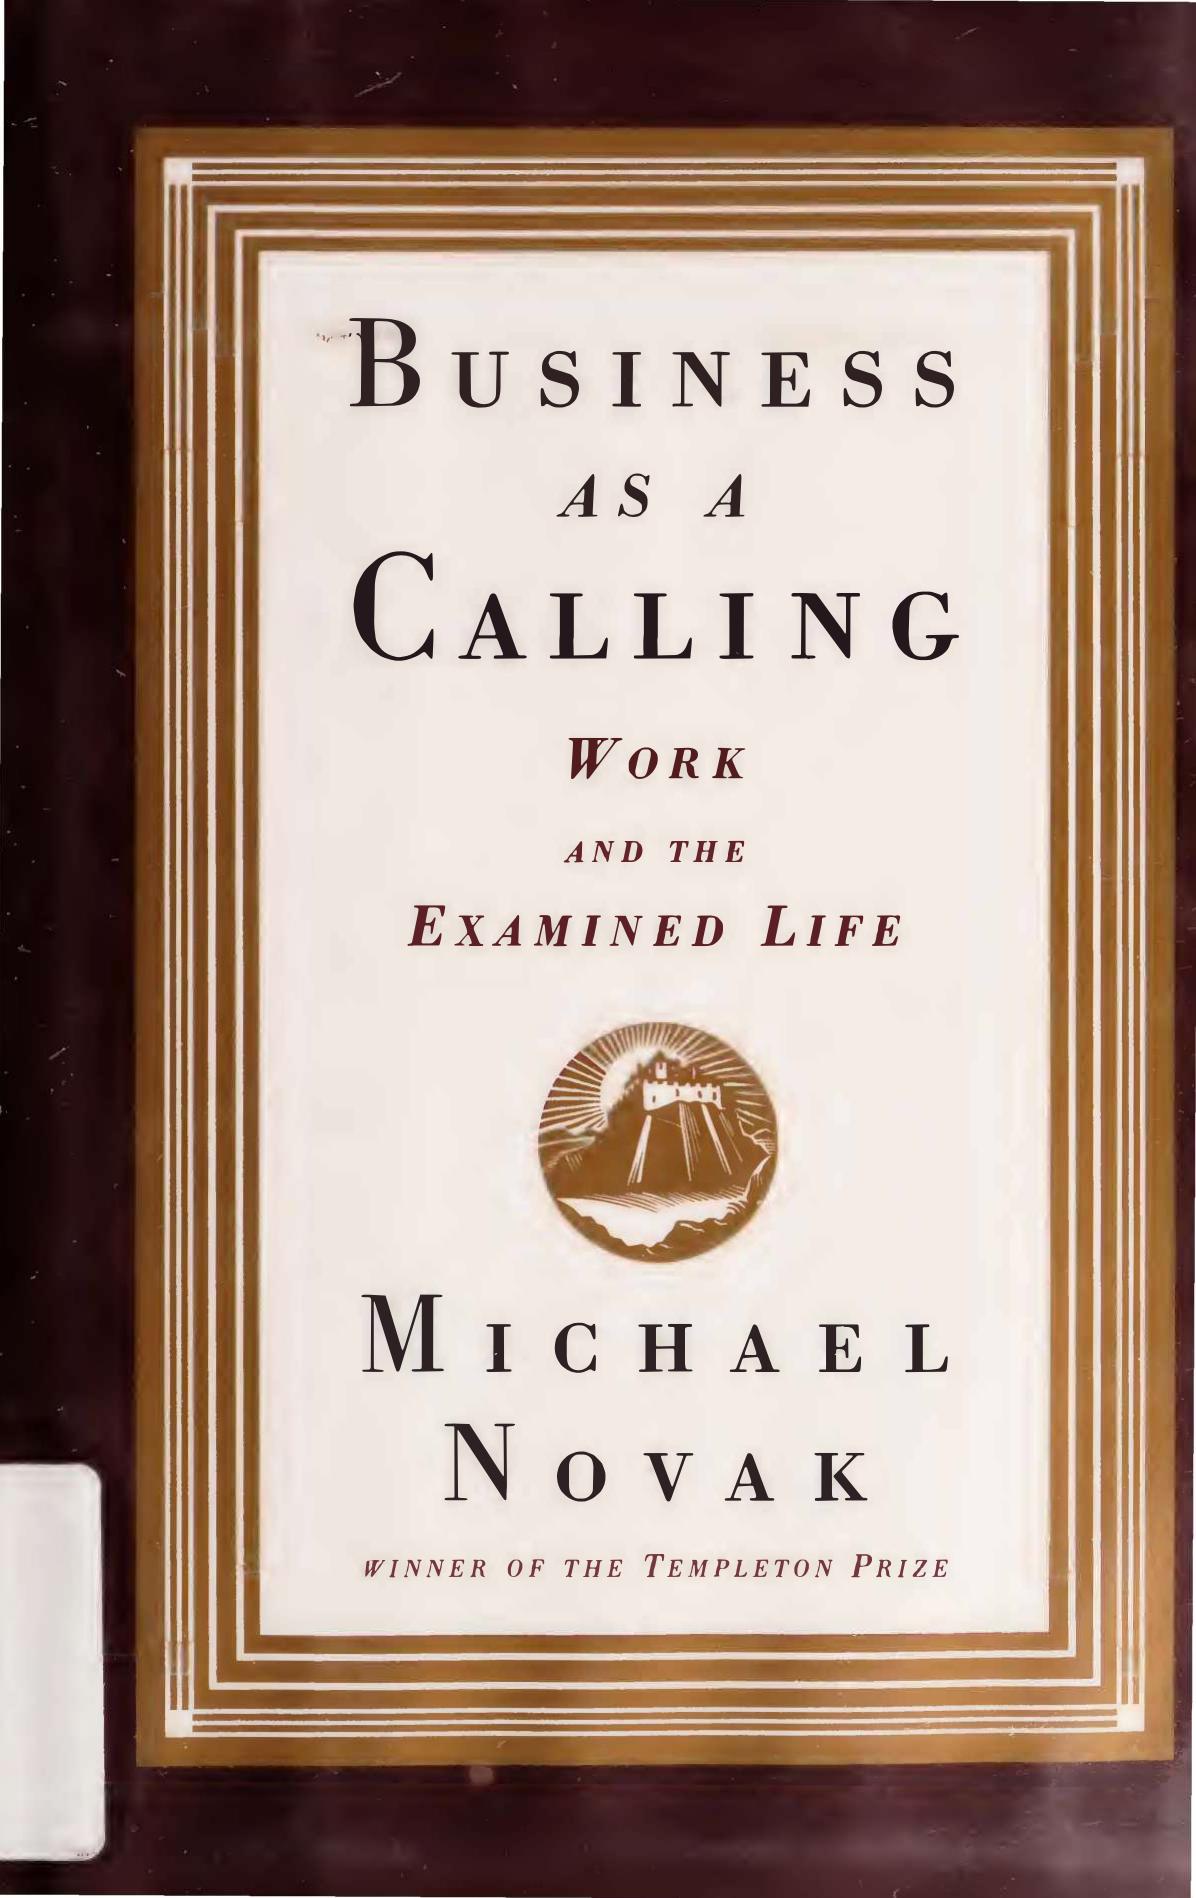 Business as Calling - Work and Examined Life by Michael Novak